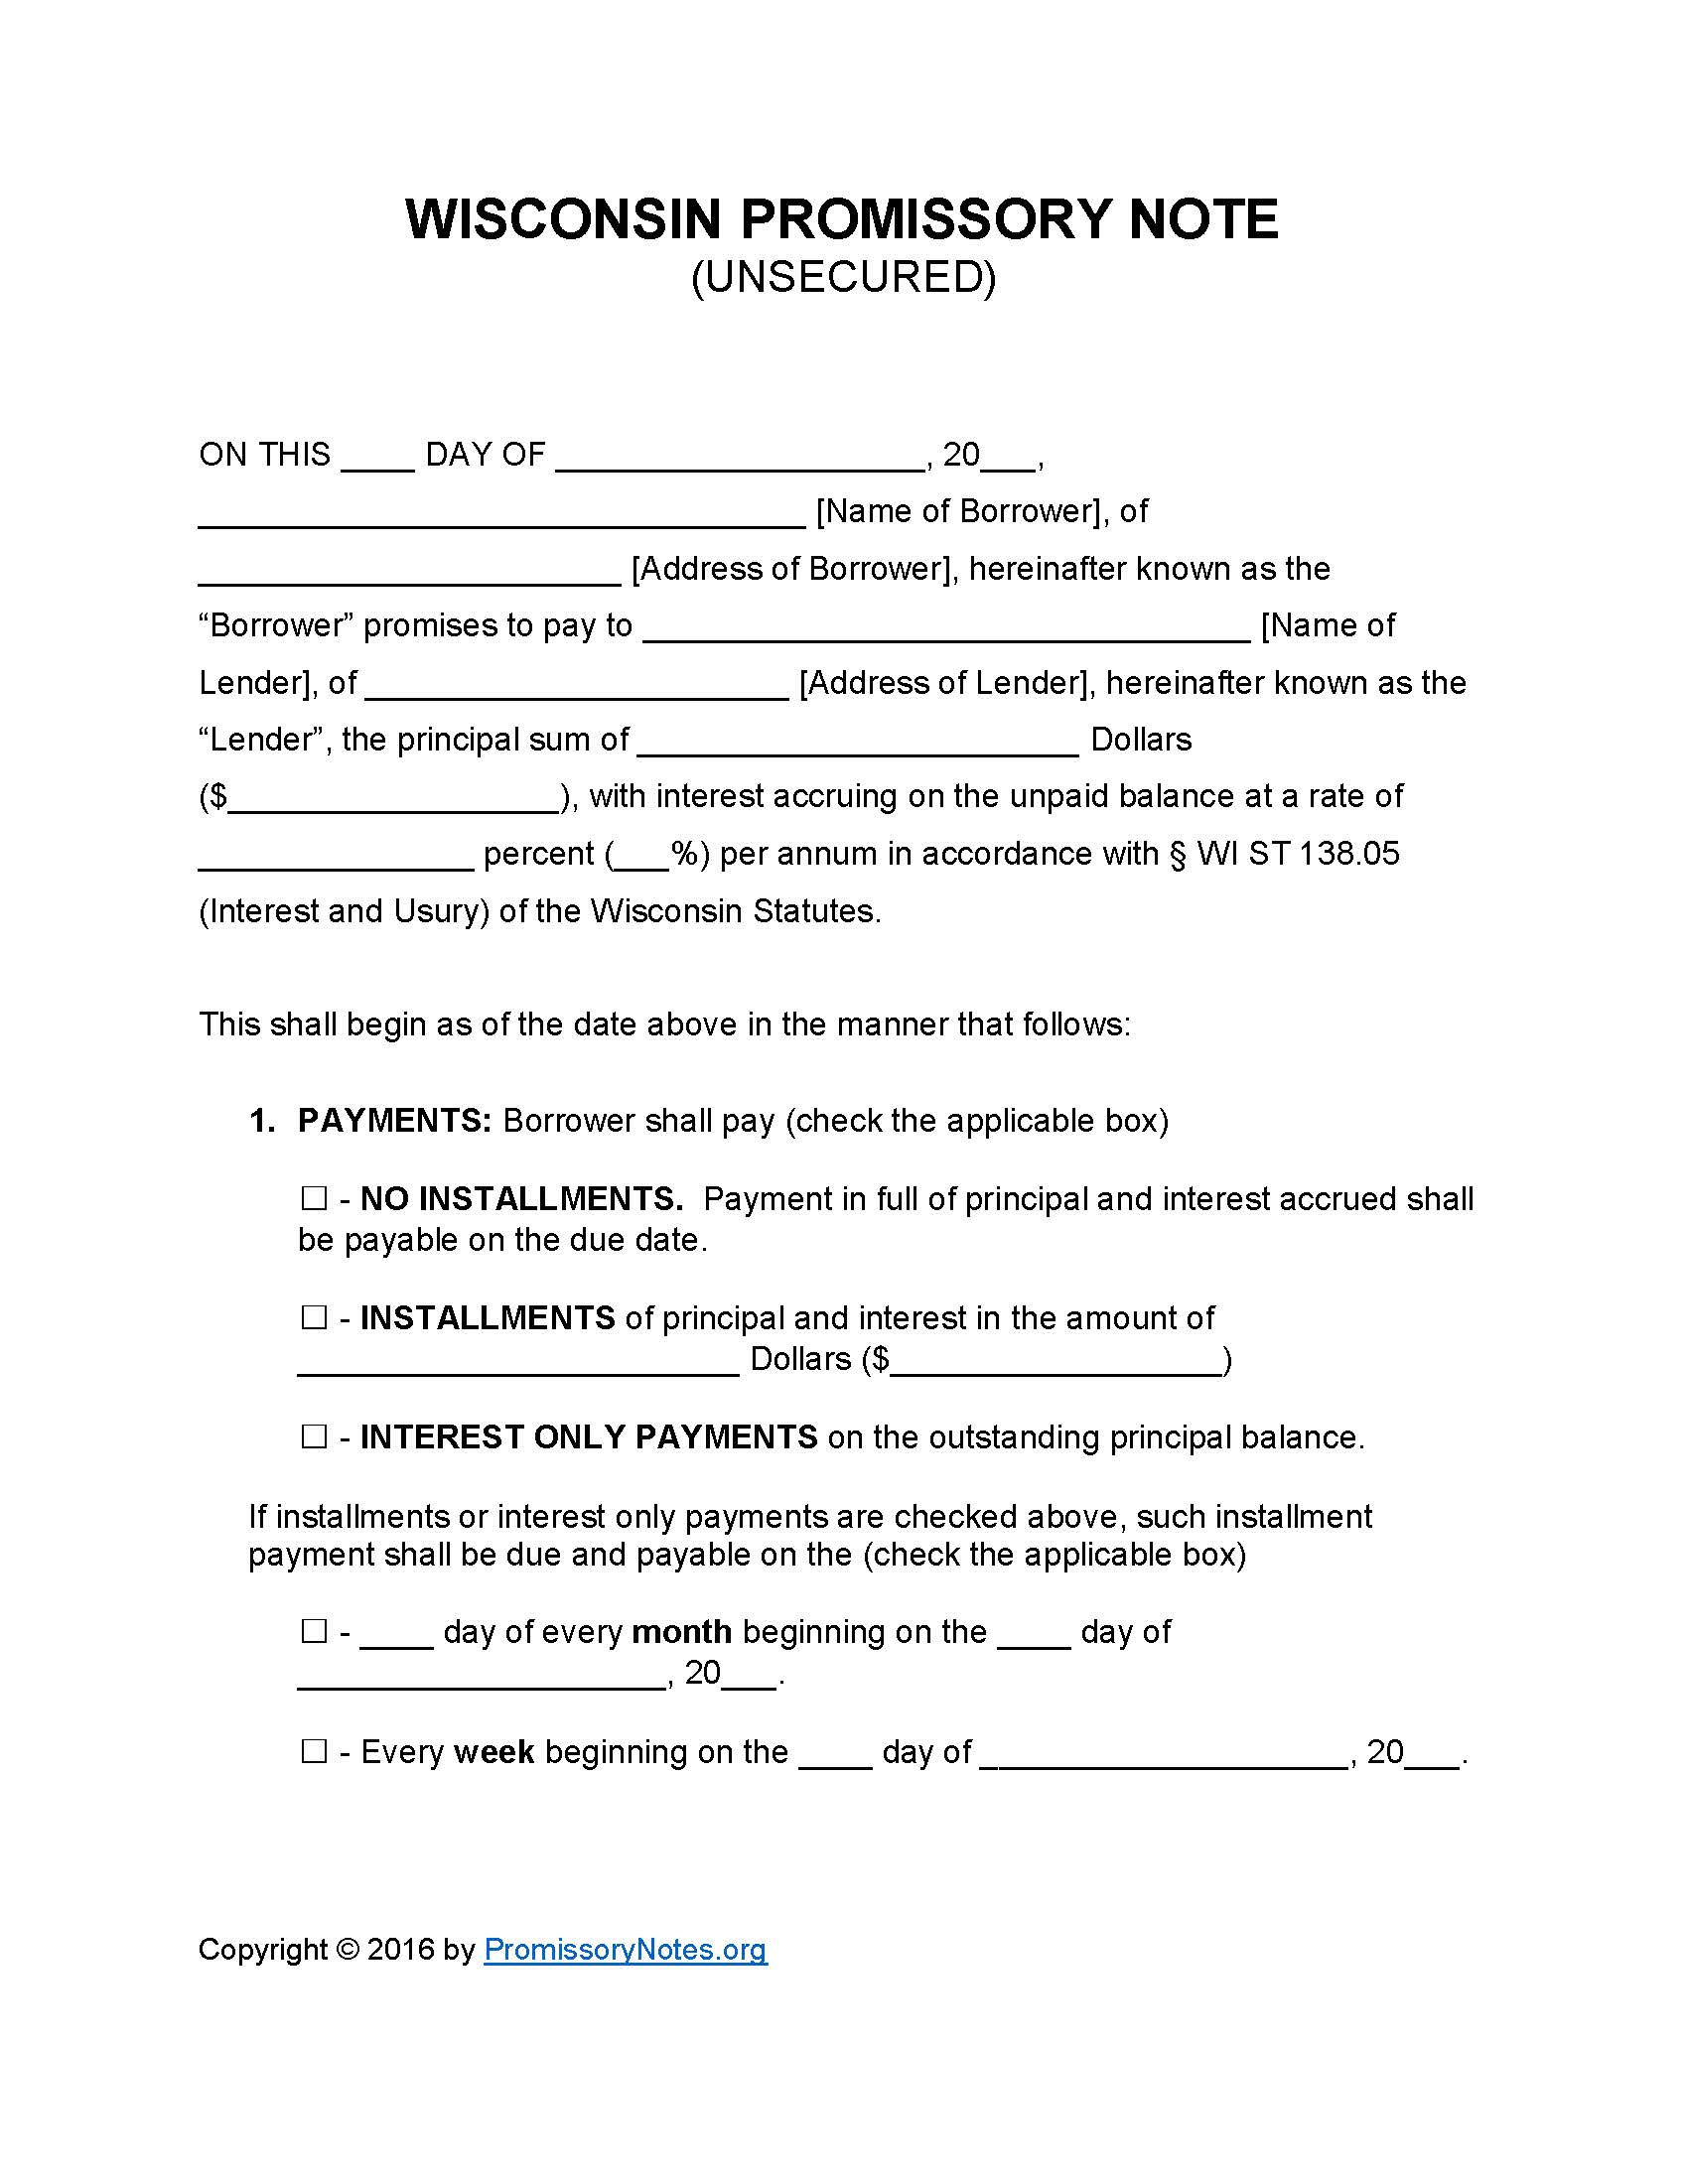 wisconsin-unsecured-promissory-note-form